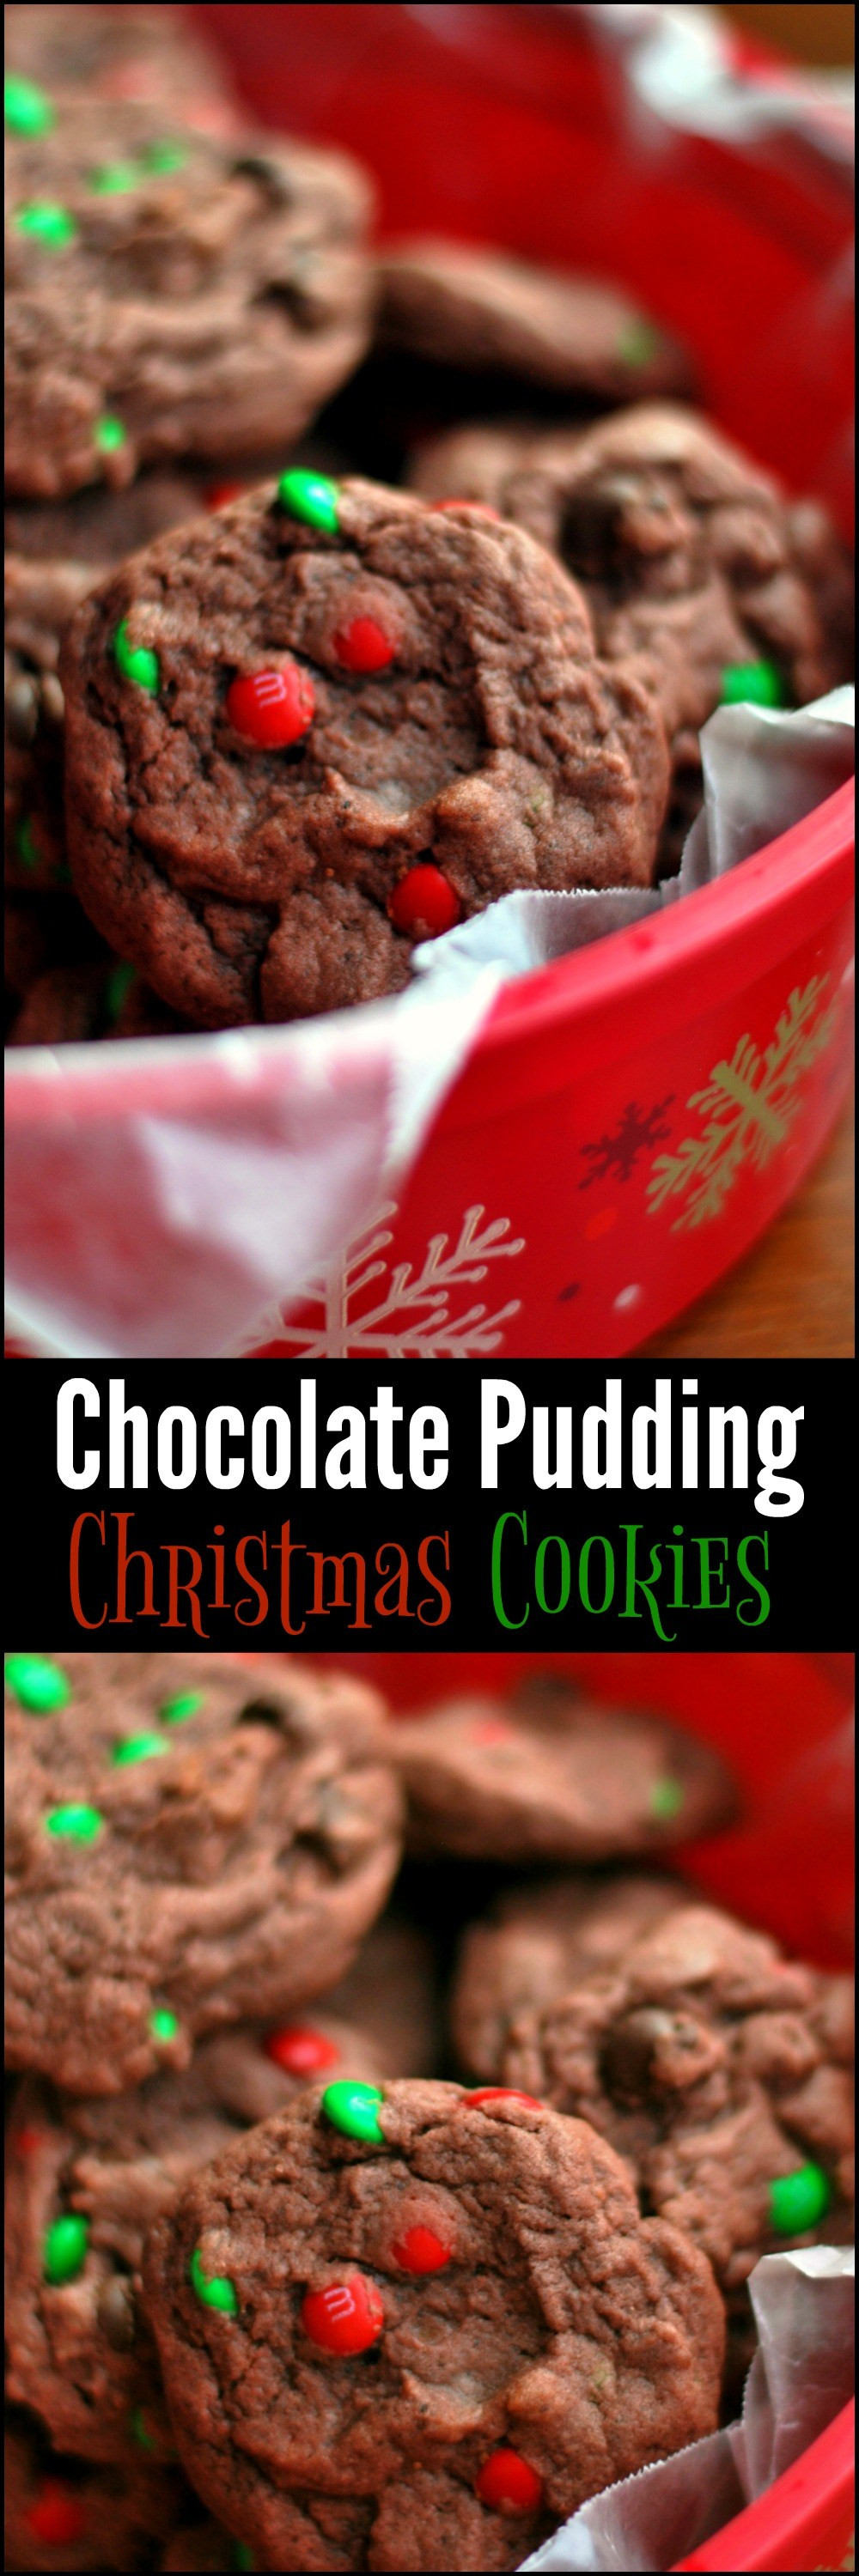 Chocolate Christmas Cookies
 Chocolate Pudding Christmas Cookies Aunt Bee s Recipes